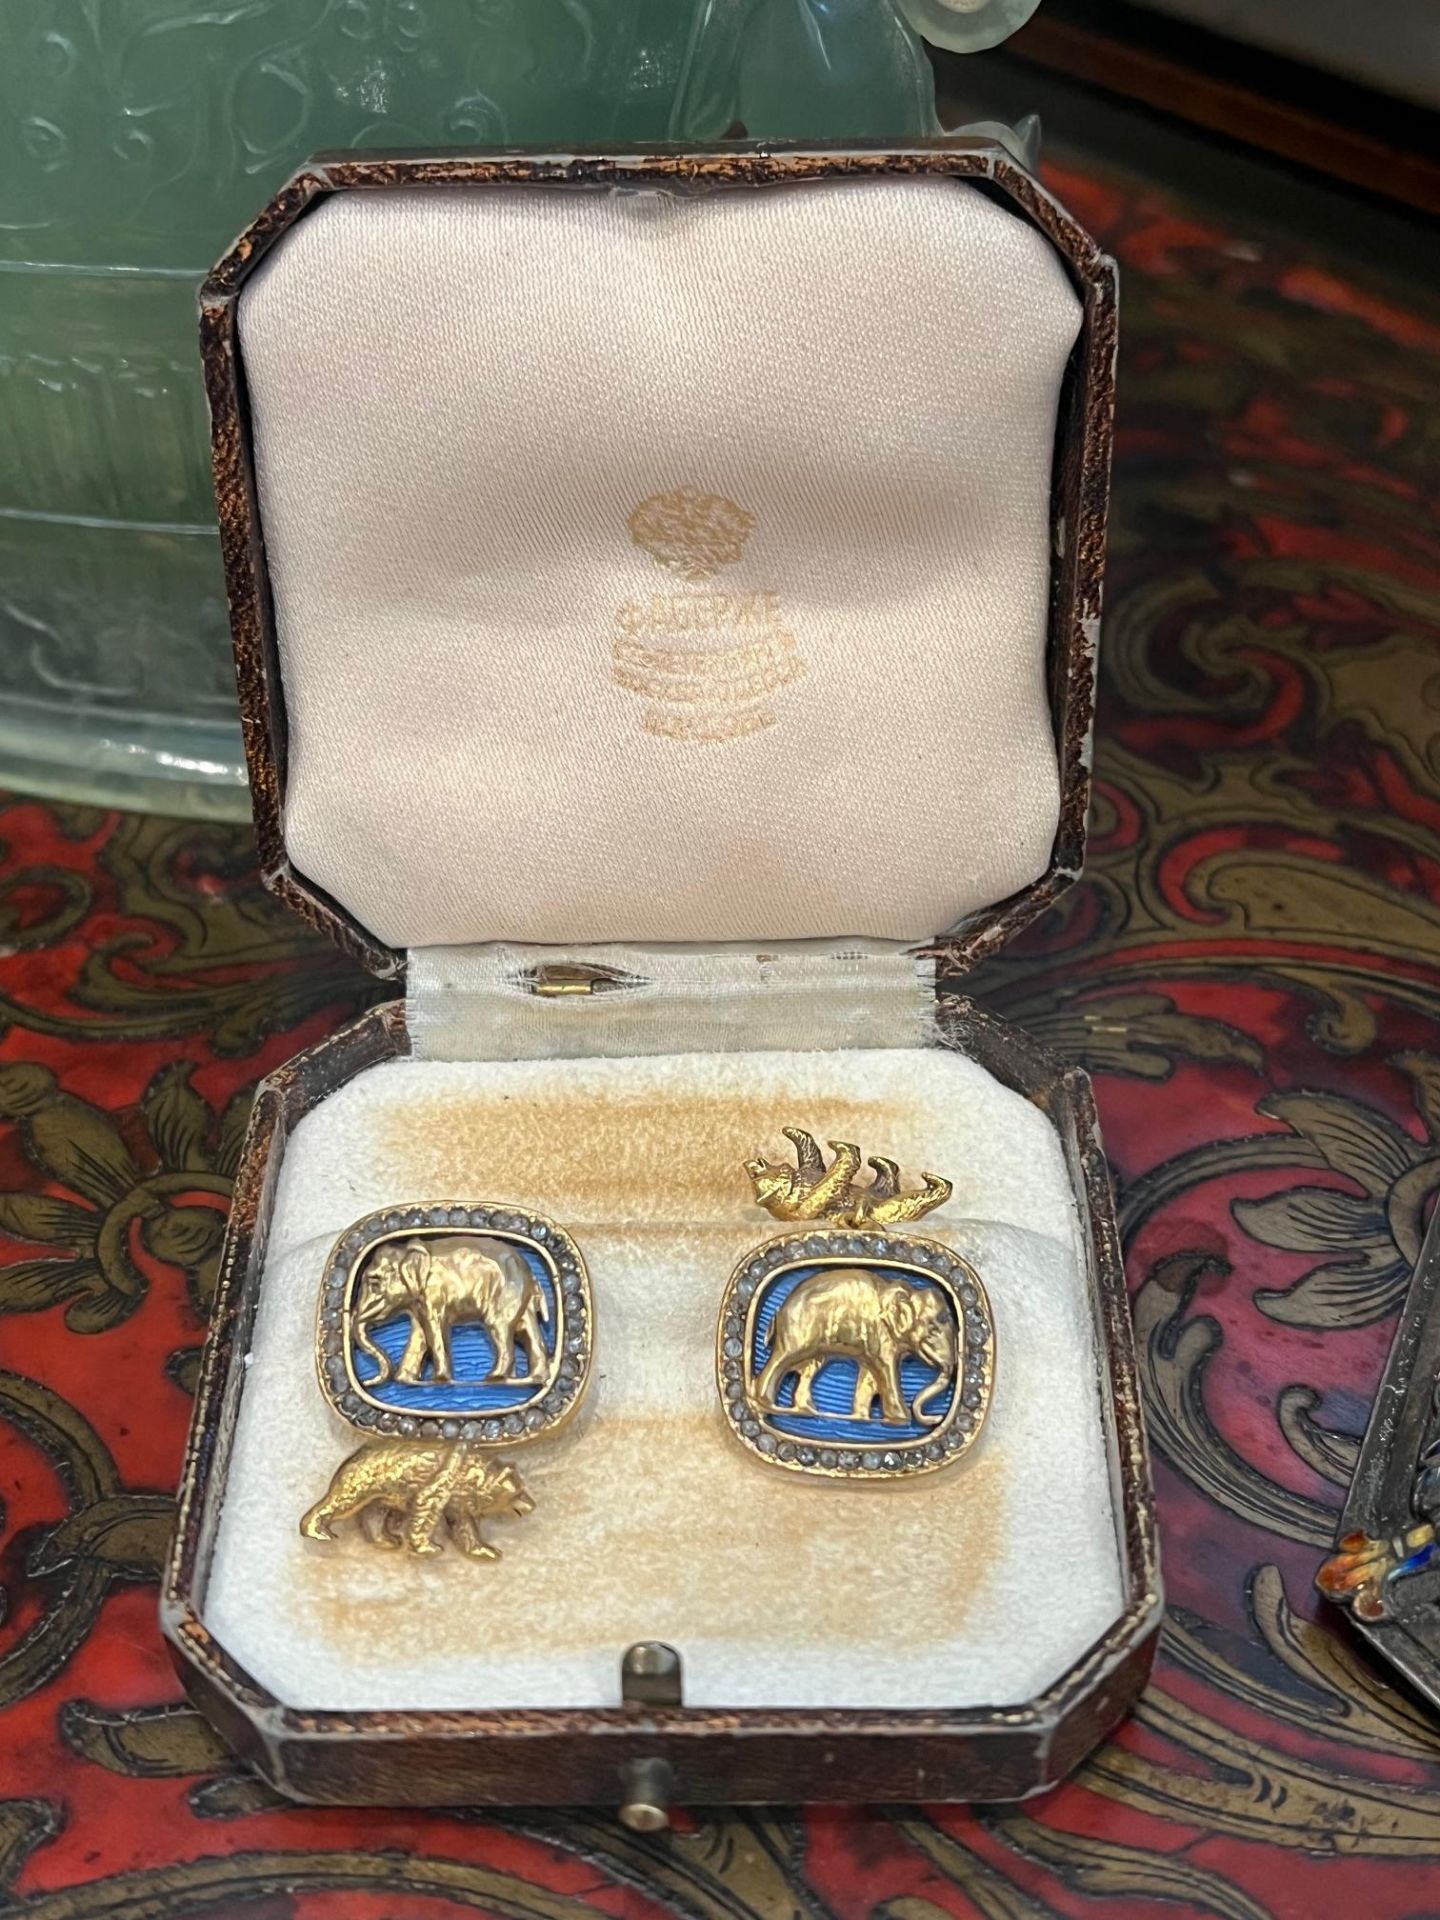 A PAIR OF FABERGE STYLE DIAMOND ENCRUSTED, SILVER GILT AND ENAMELLED CUFFLINKS - Image 6 of 13